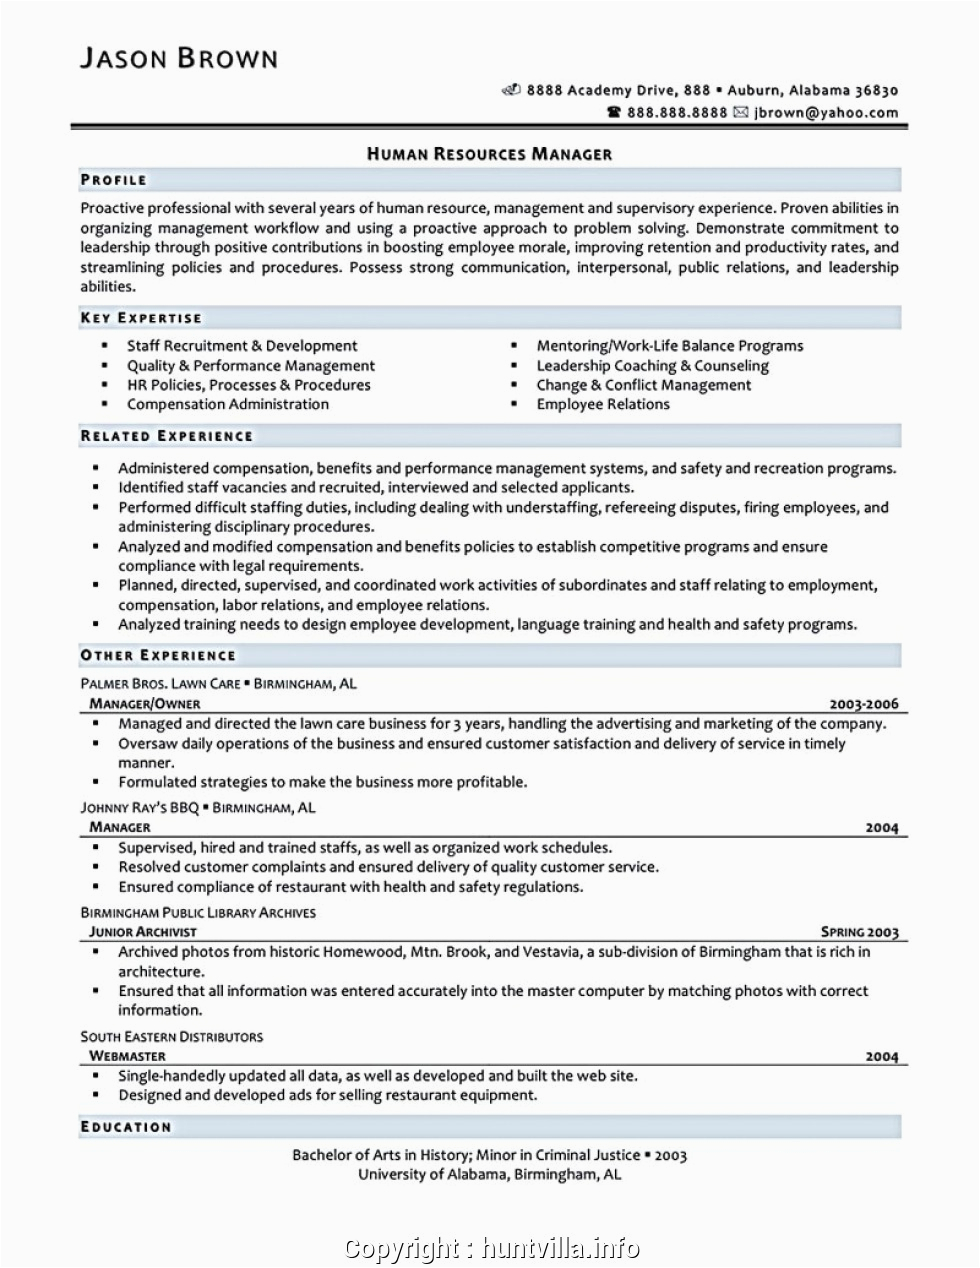 Sample Resume for An Entry Level Human Resource Position Simply Human Resources assistant Cv Entry Level Human